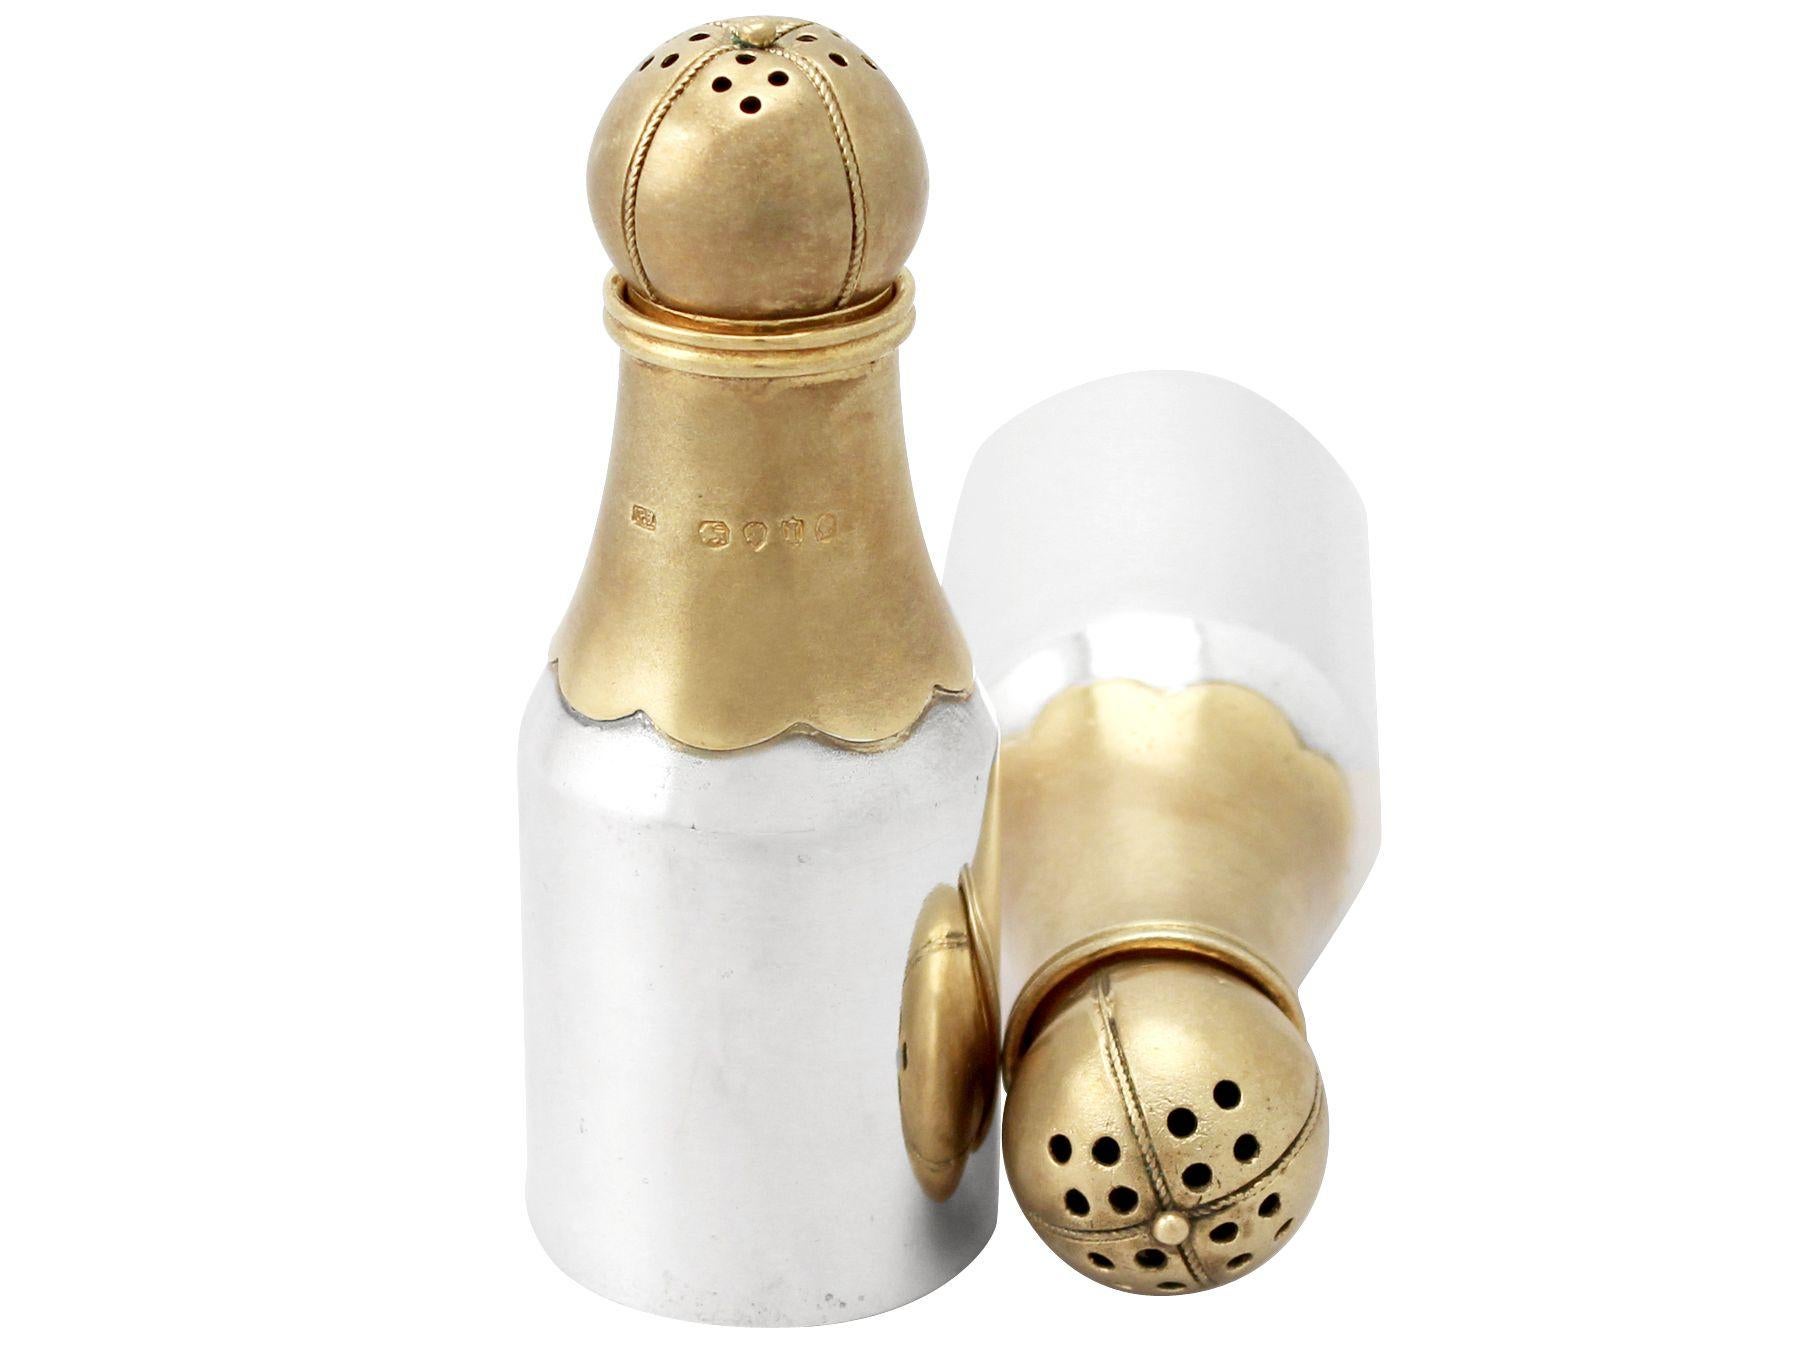 A fine and impressive pair of antique Victorian English sterling silver novelty pepper shakers in the form of champagne bottles; an addition to our silver cruets or condiments collection.

These impressive antique Victorian silver peppers, in